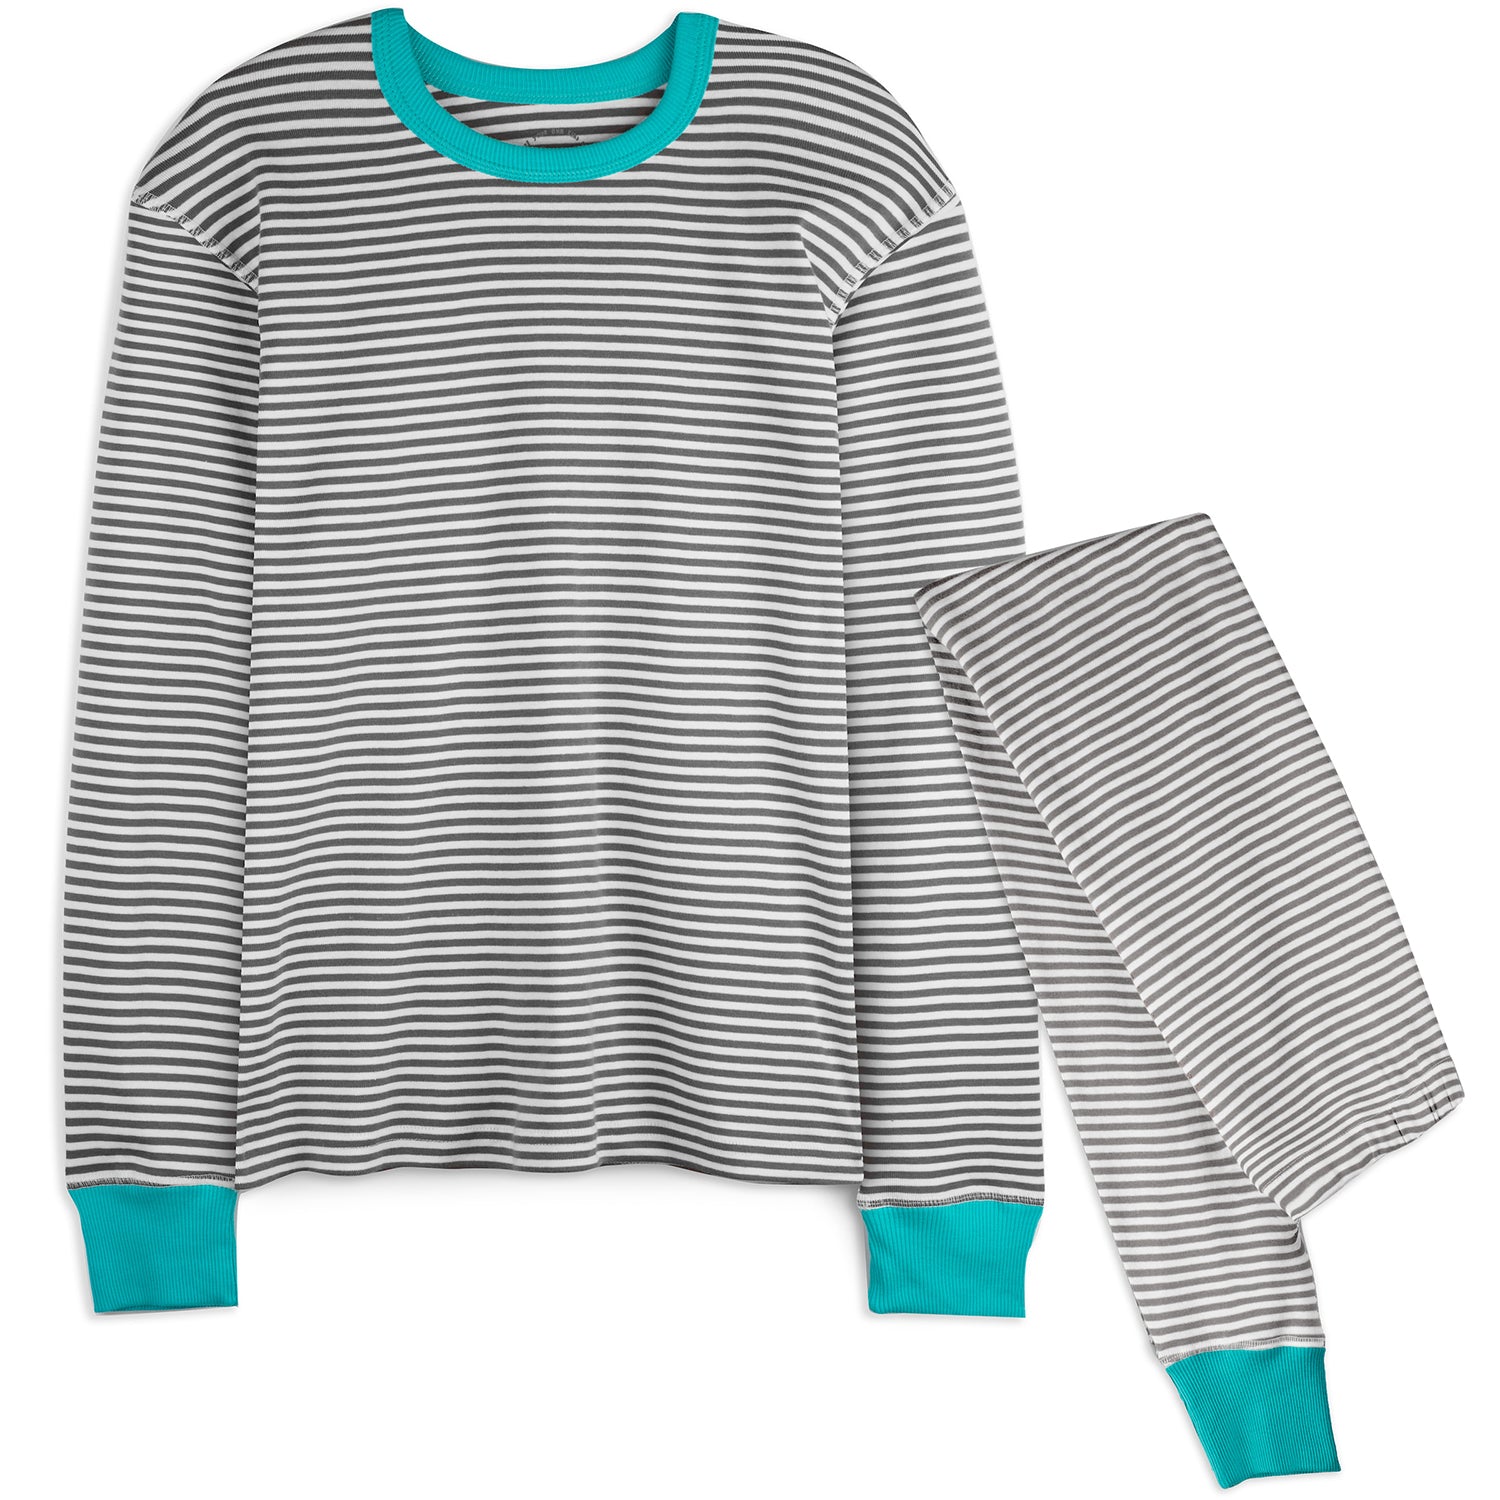 Gray-striped pajamas for adults - The ultimate choice for parents' comfort and style